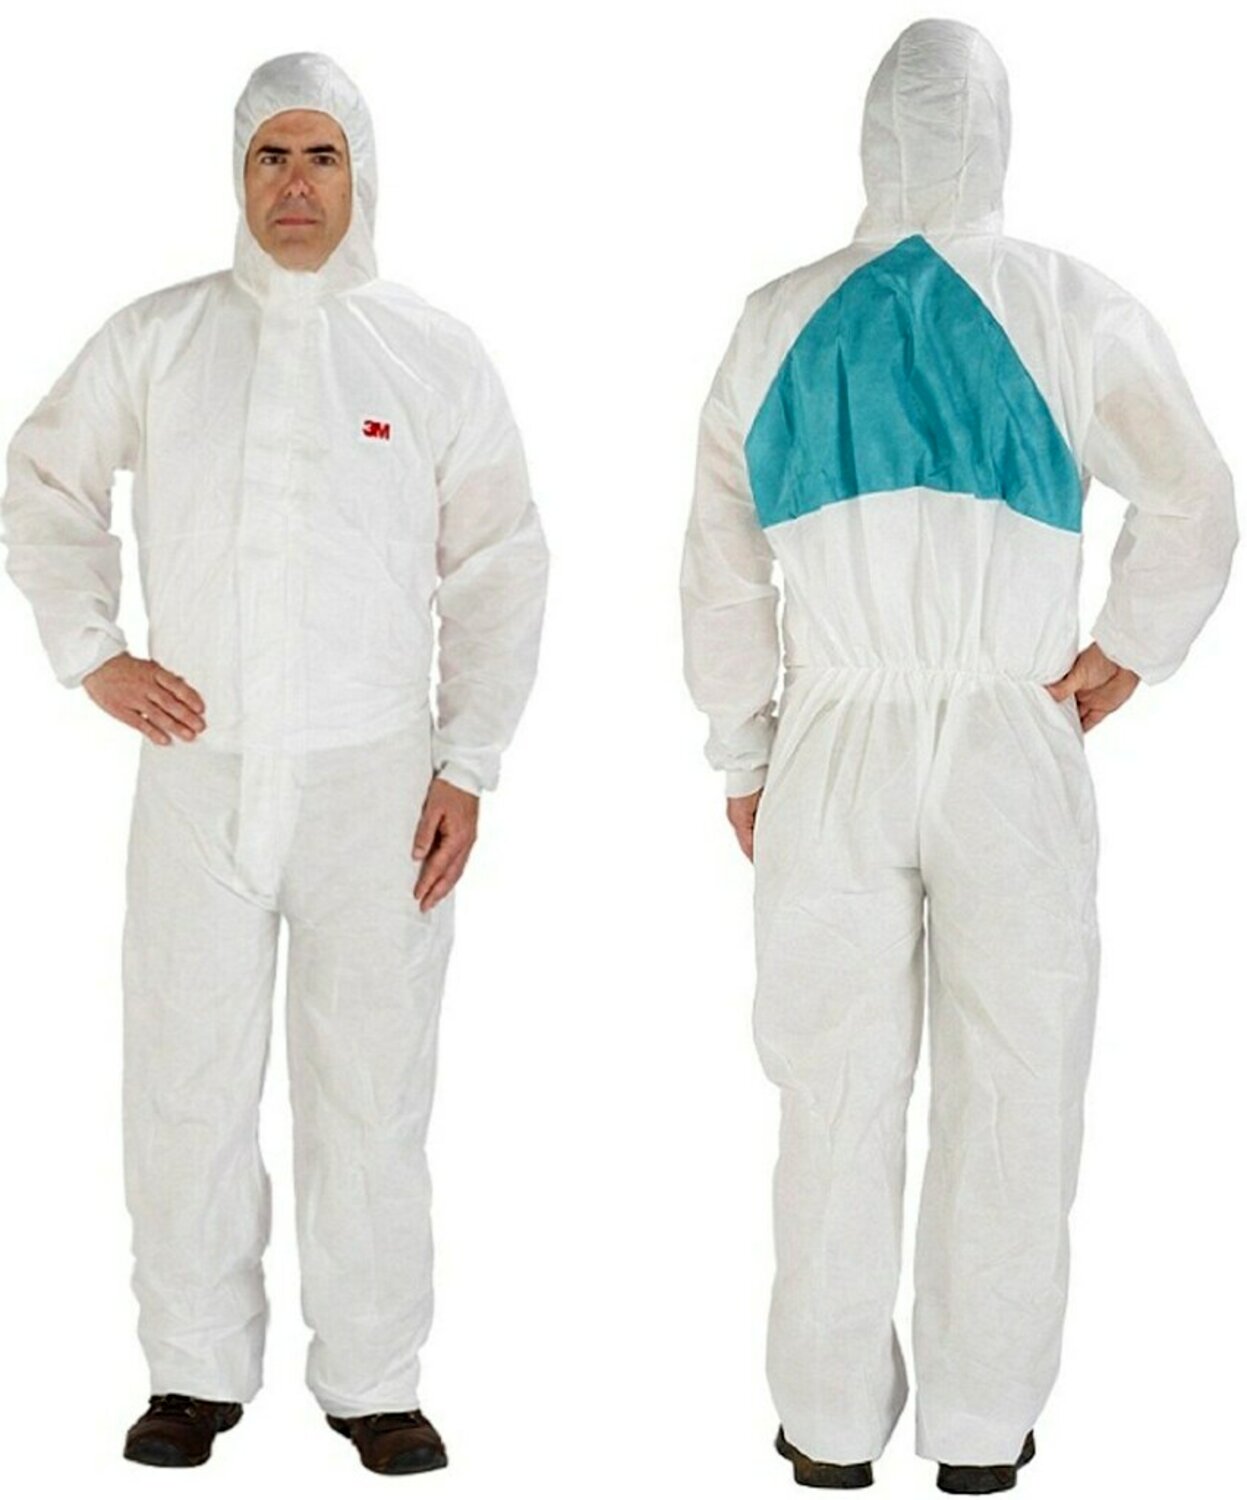 7000089643 - 3M Disposable Protective Coverall 4520-3XL/46776, White/Green, Type
5/6, 1/Bag, 20 Bags/Case